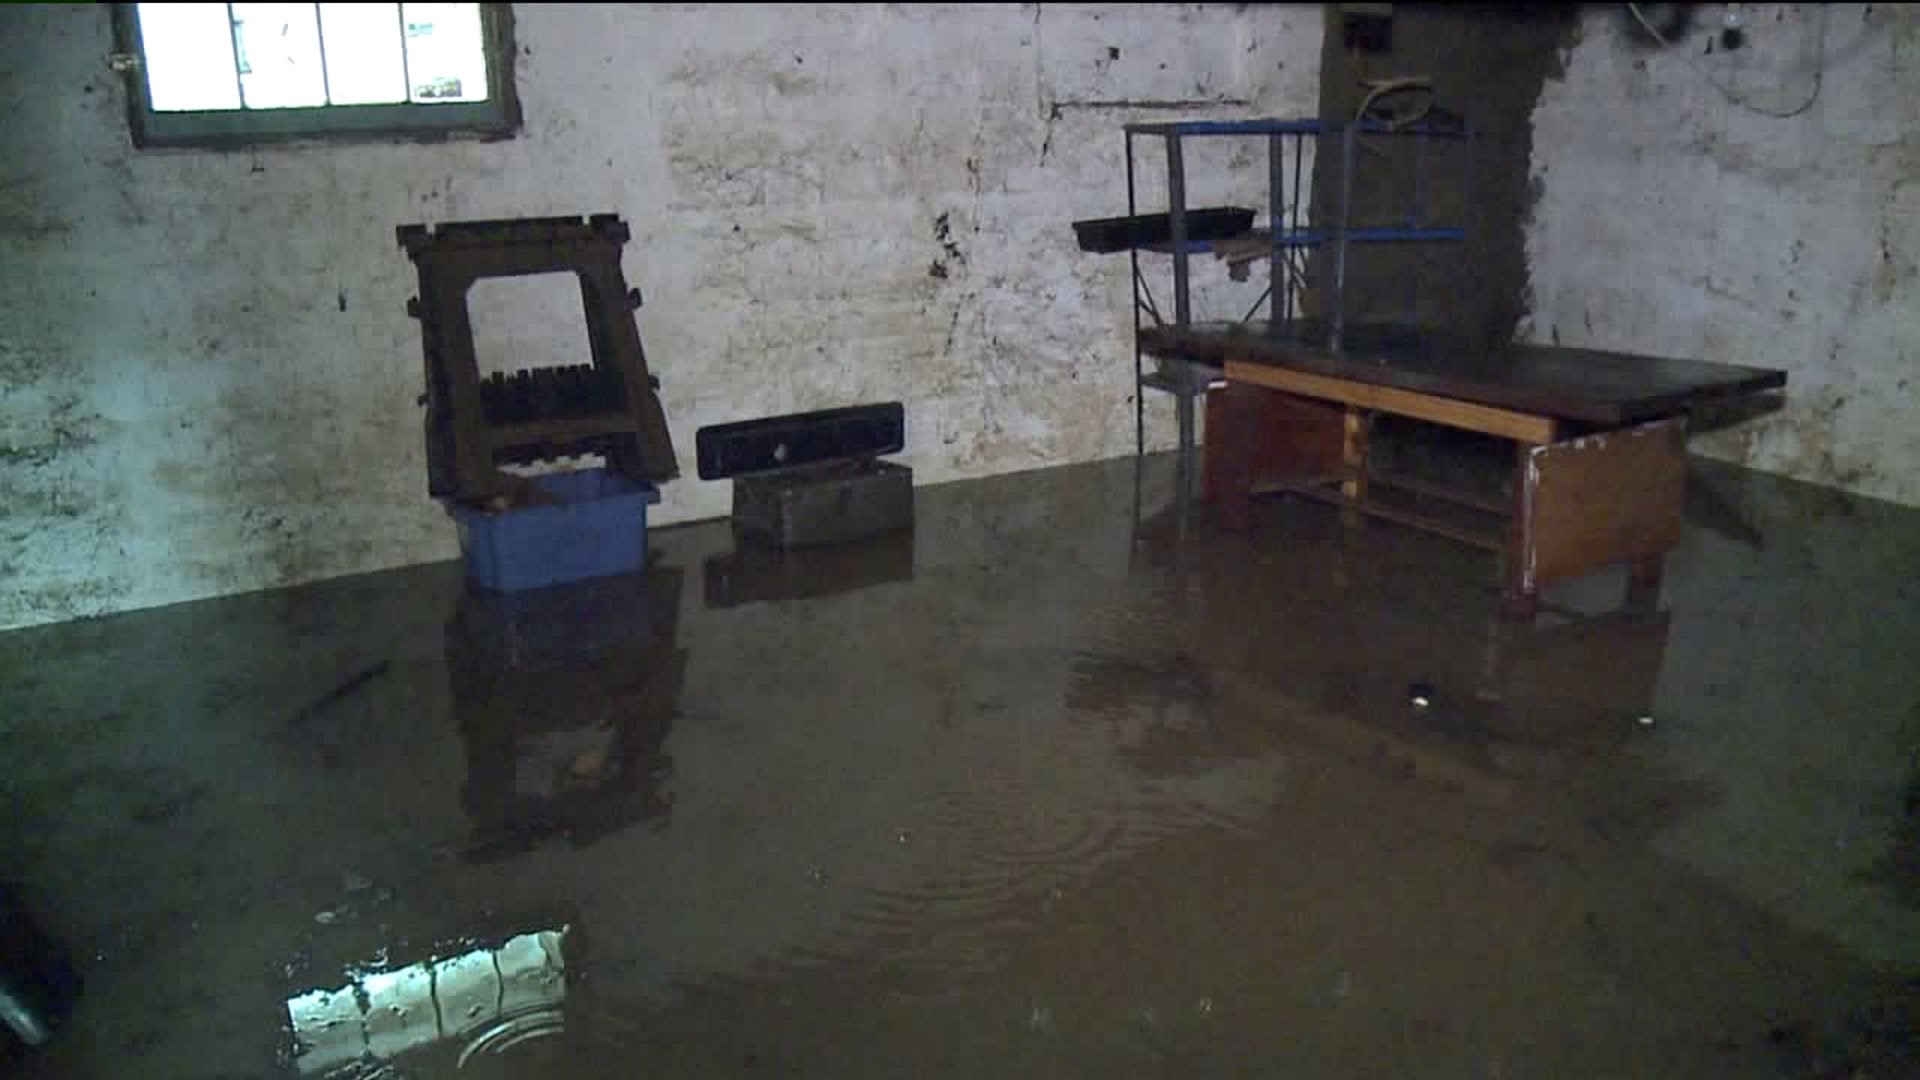 People Band Together in Bradford County During Flooding